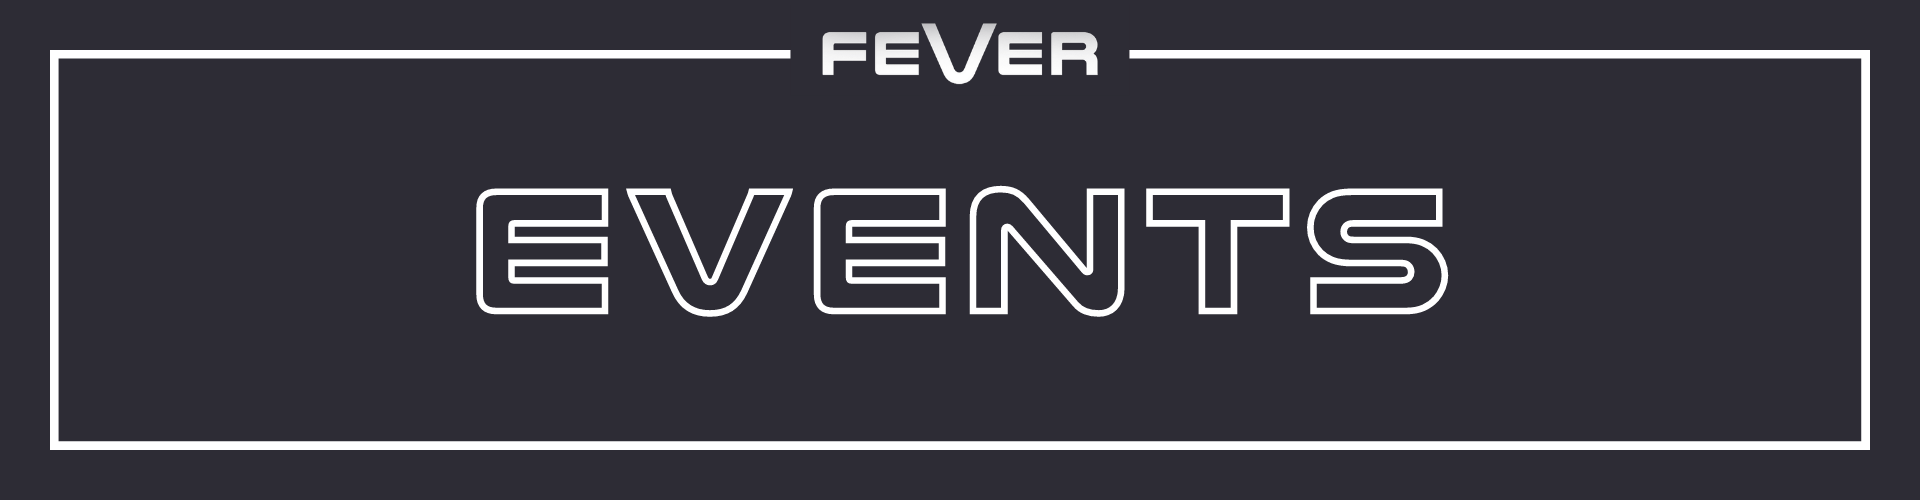 Events at Fever